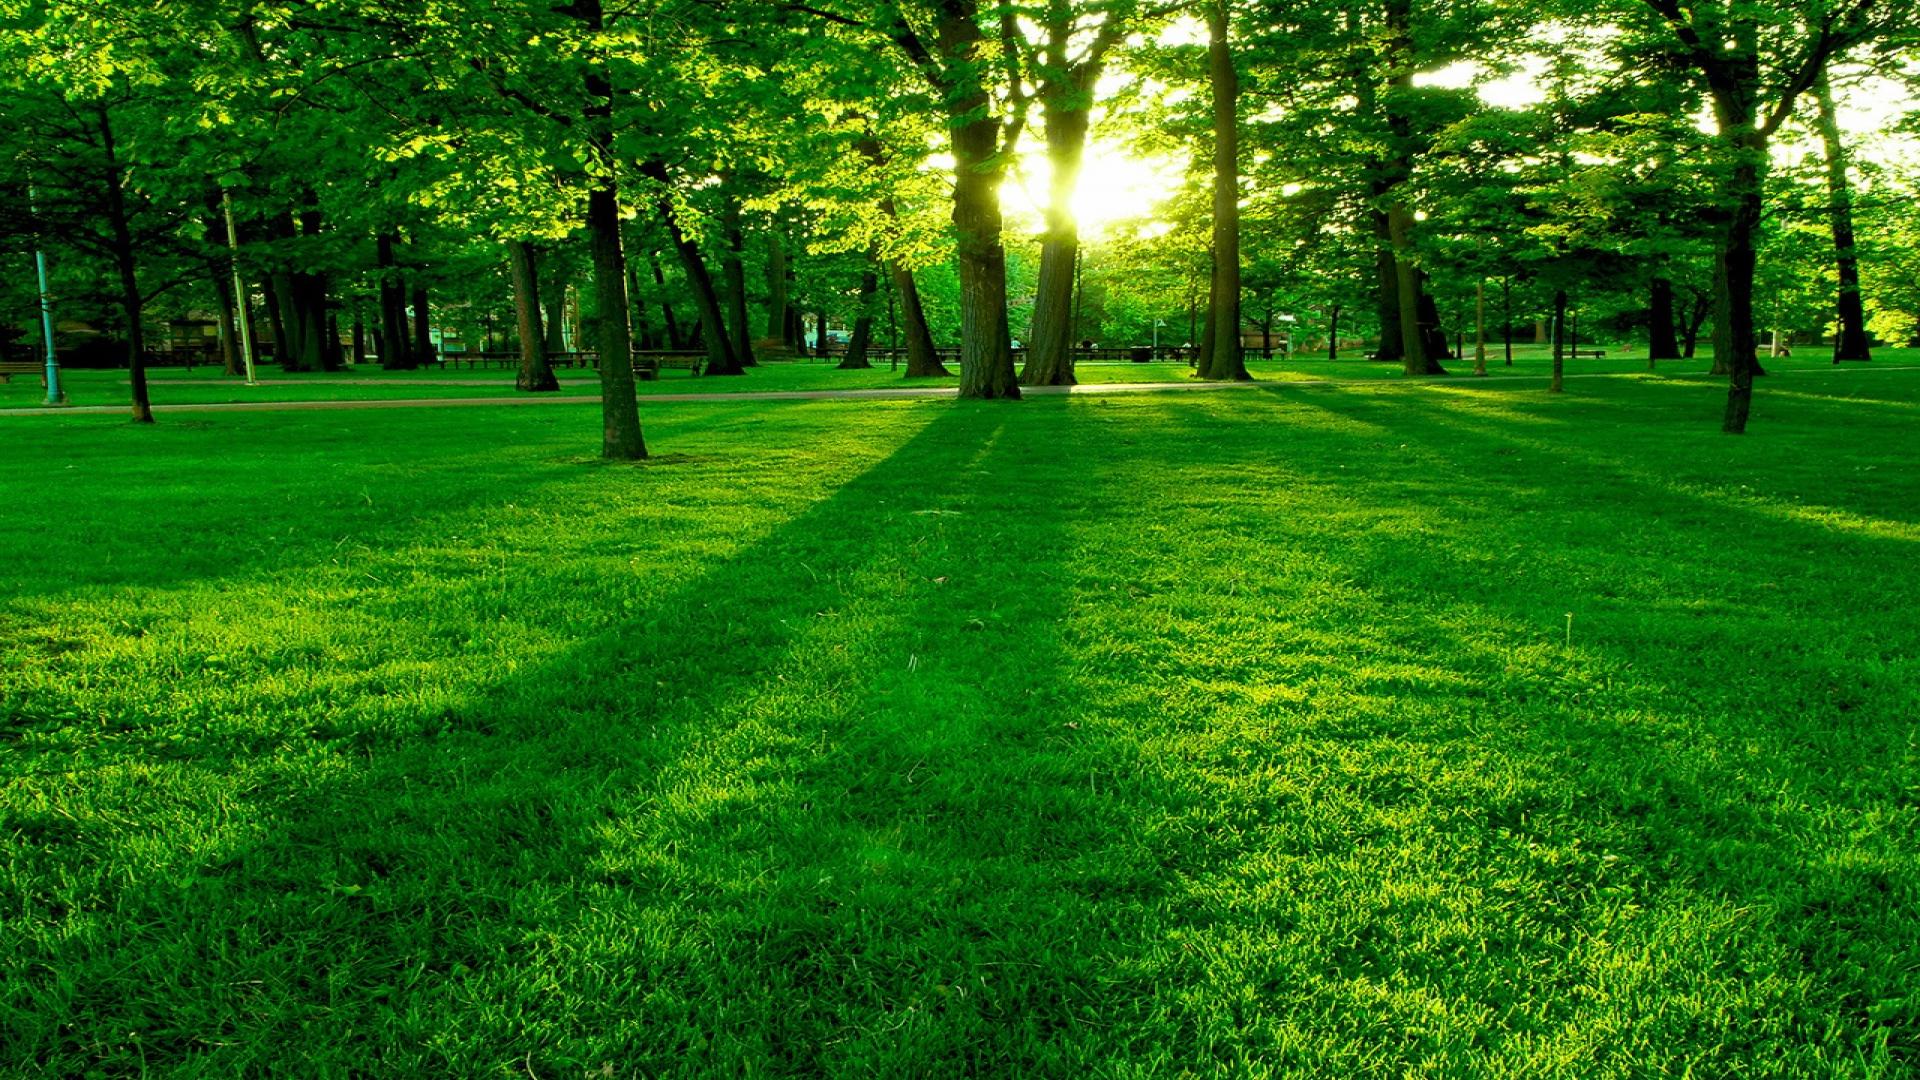 Hd Wallpaper Cool Wallpapers, Green Image Landscaping